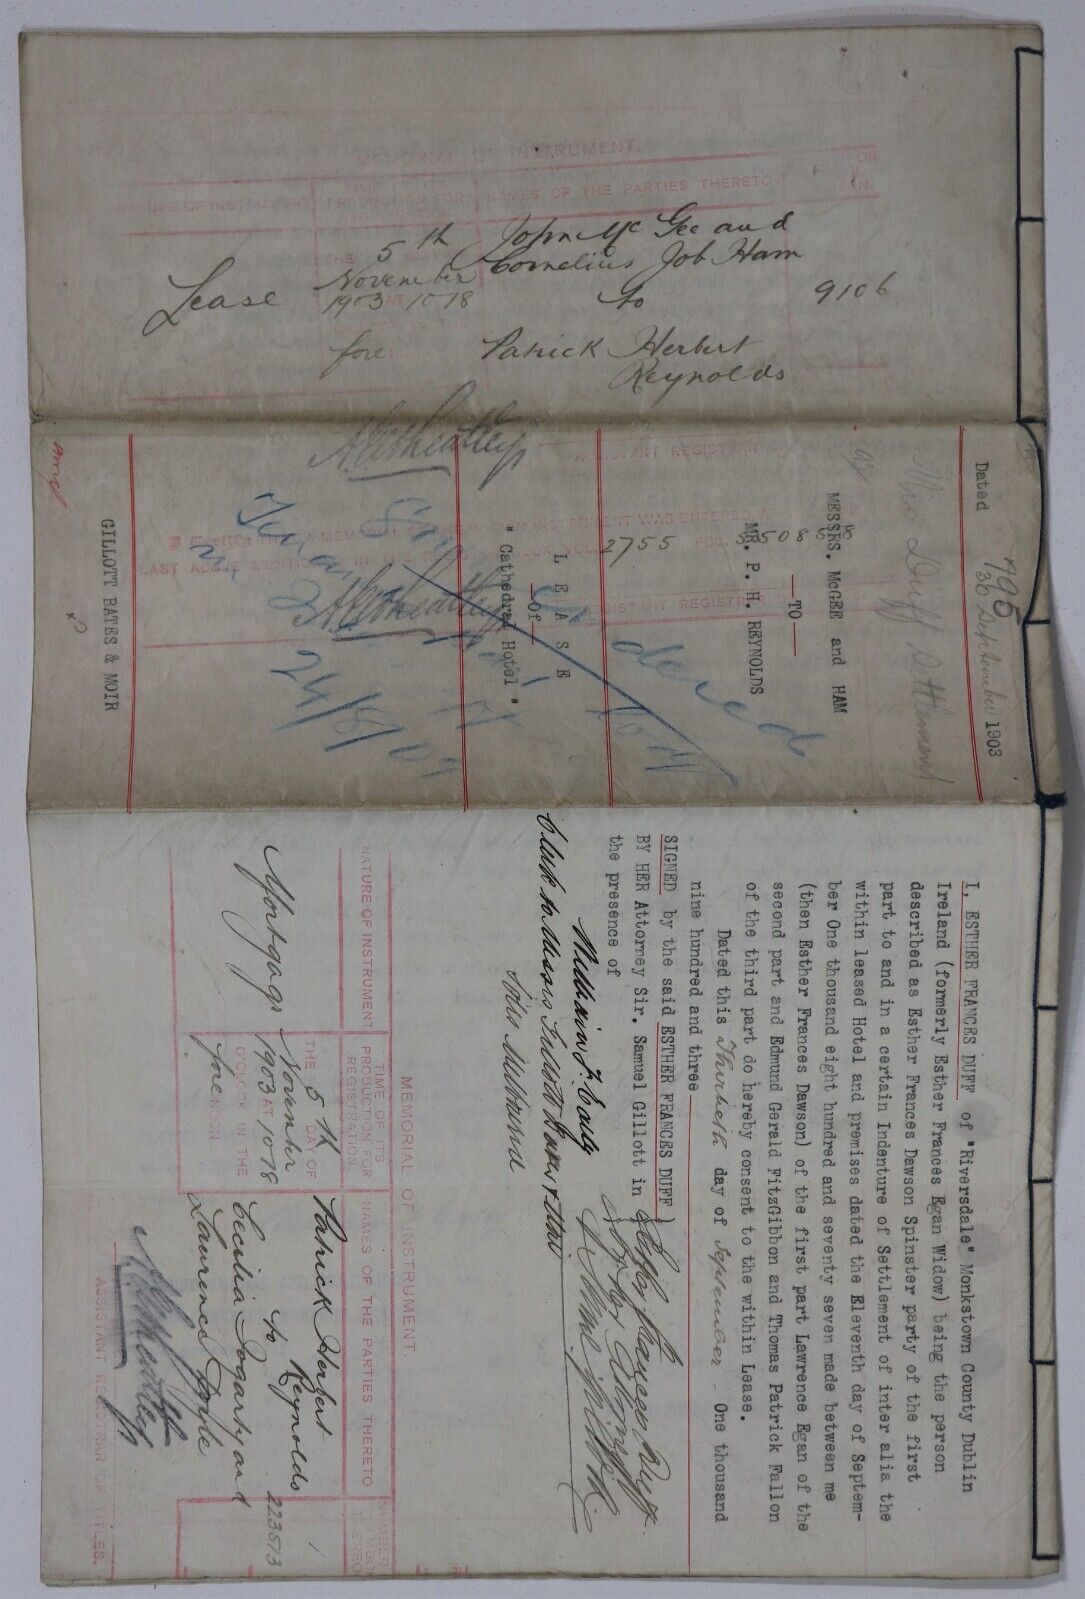 1903 Lease Agreement For Cathedral Hotel - Melbourne CBD - Manuscript History